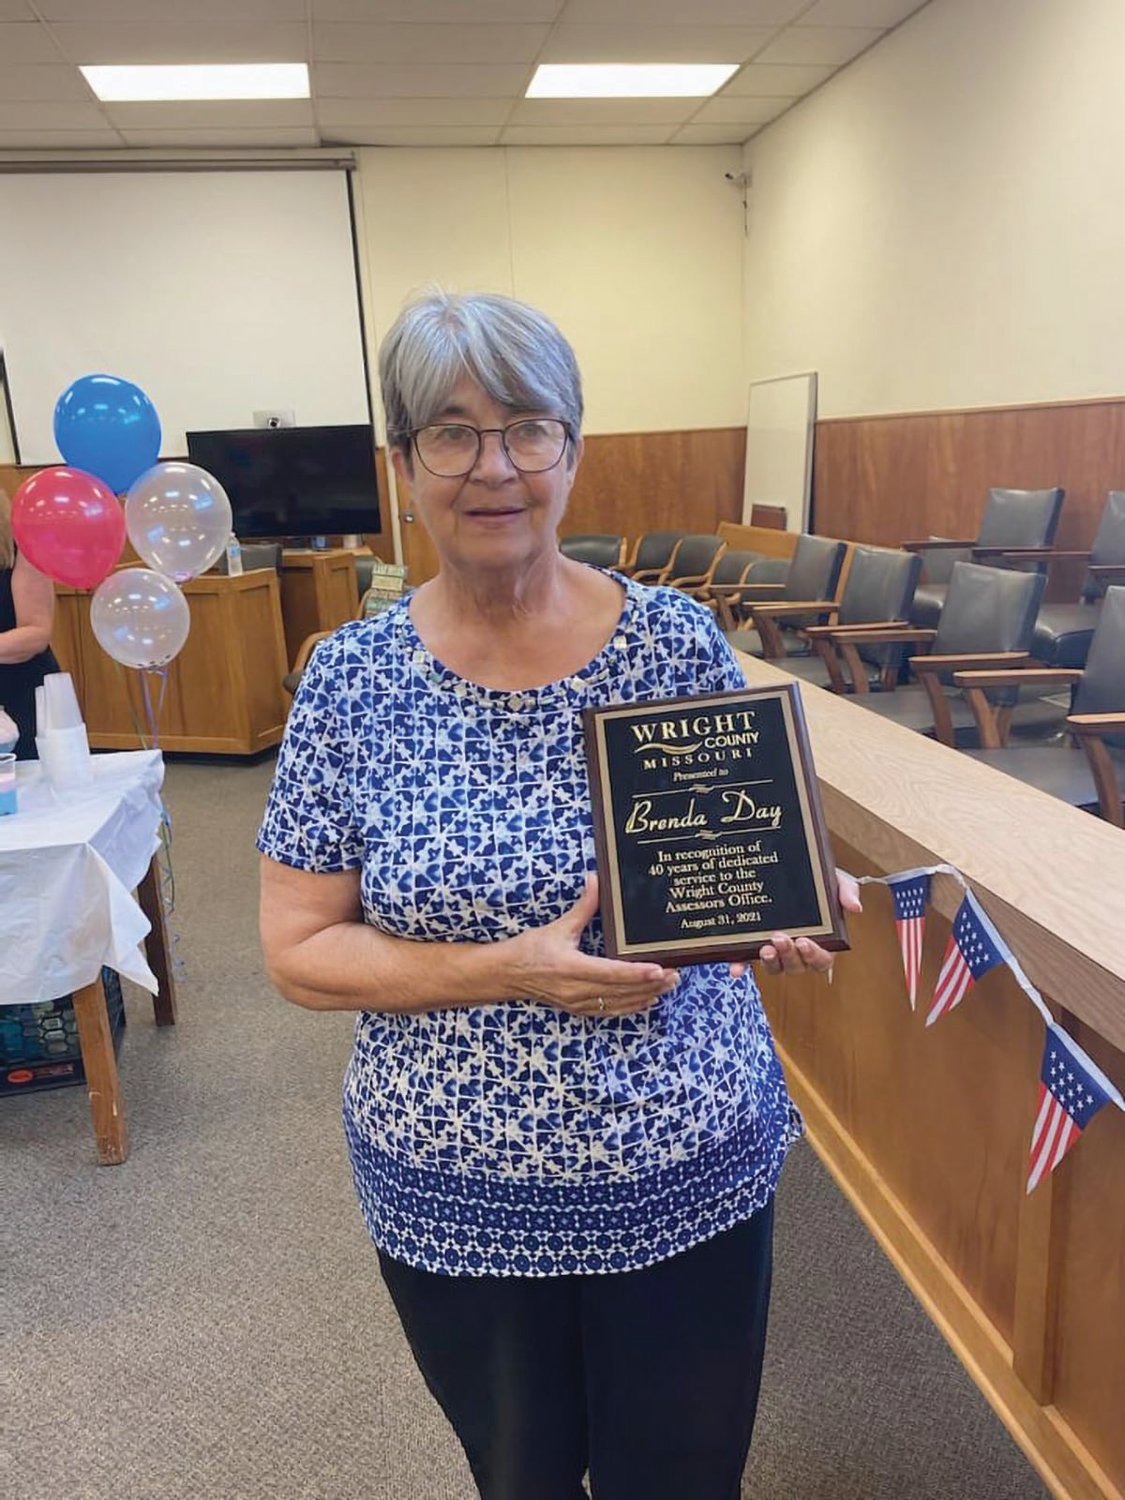 Brenda Day holds a plaque honoring her for 40 years of dedicated service to the Wright County Assessor’s Office at a retirement celebration at the end of August inside the Wright County Courthouse.